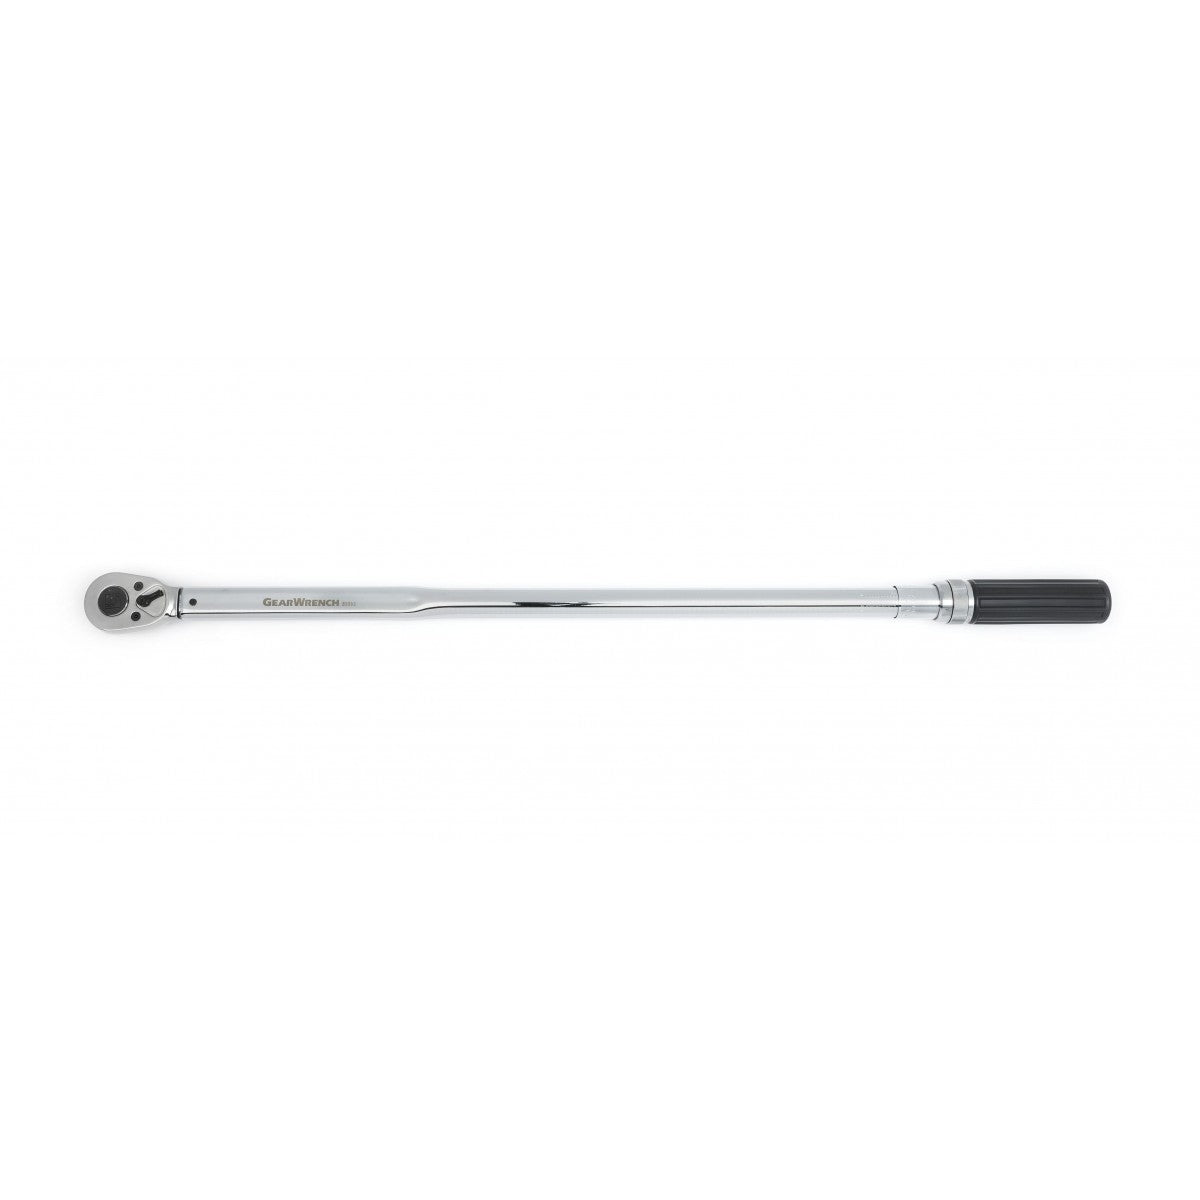 3/4" Micrometer Torque Wrench 85065 by Gearwrench